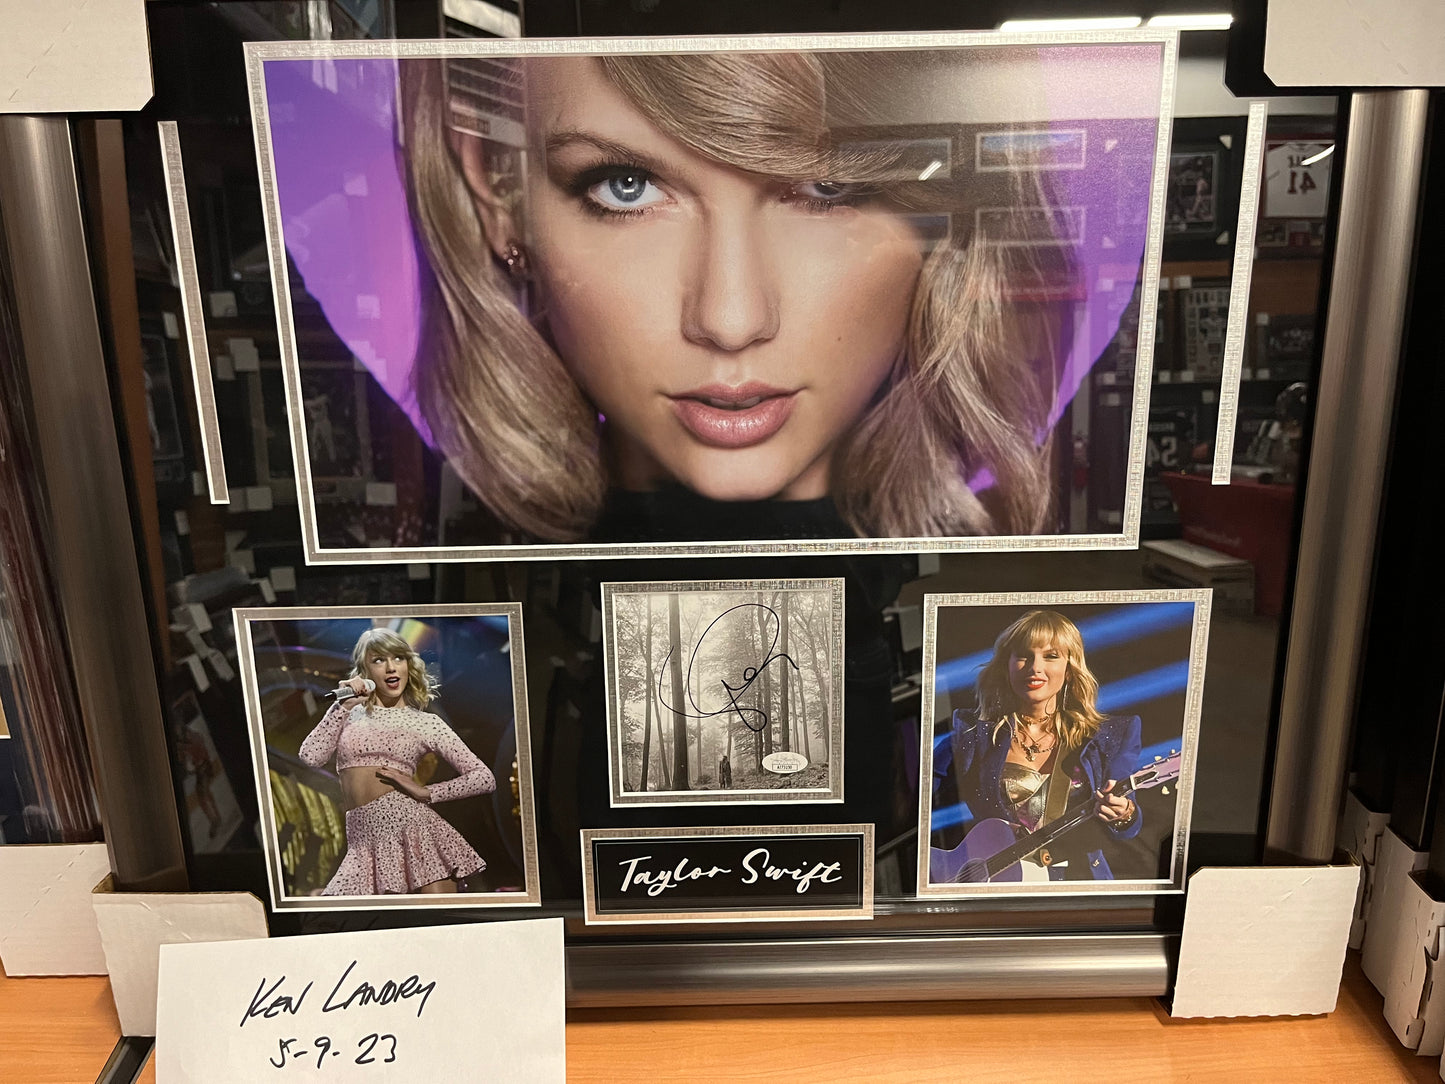 Taylor Swift  signed CD COVER  Profressionally mattted and framed